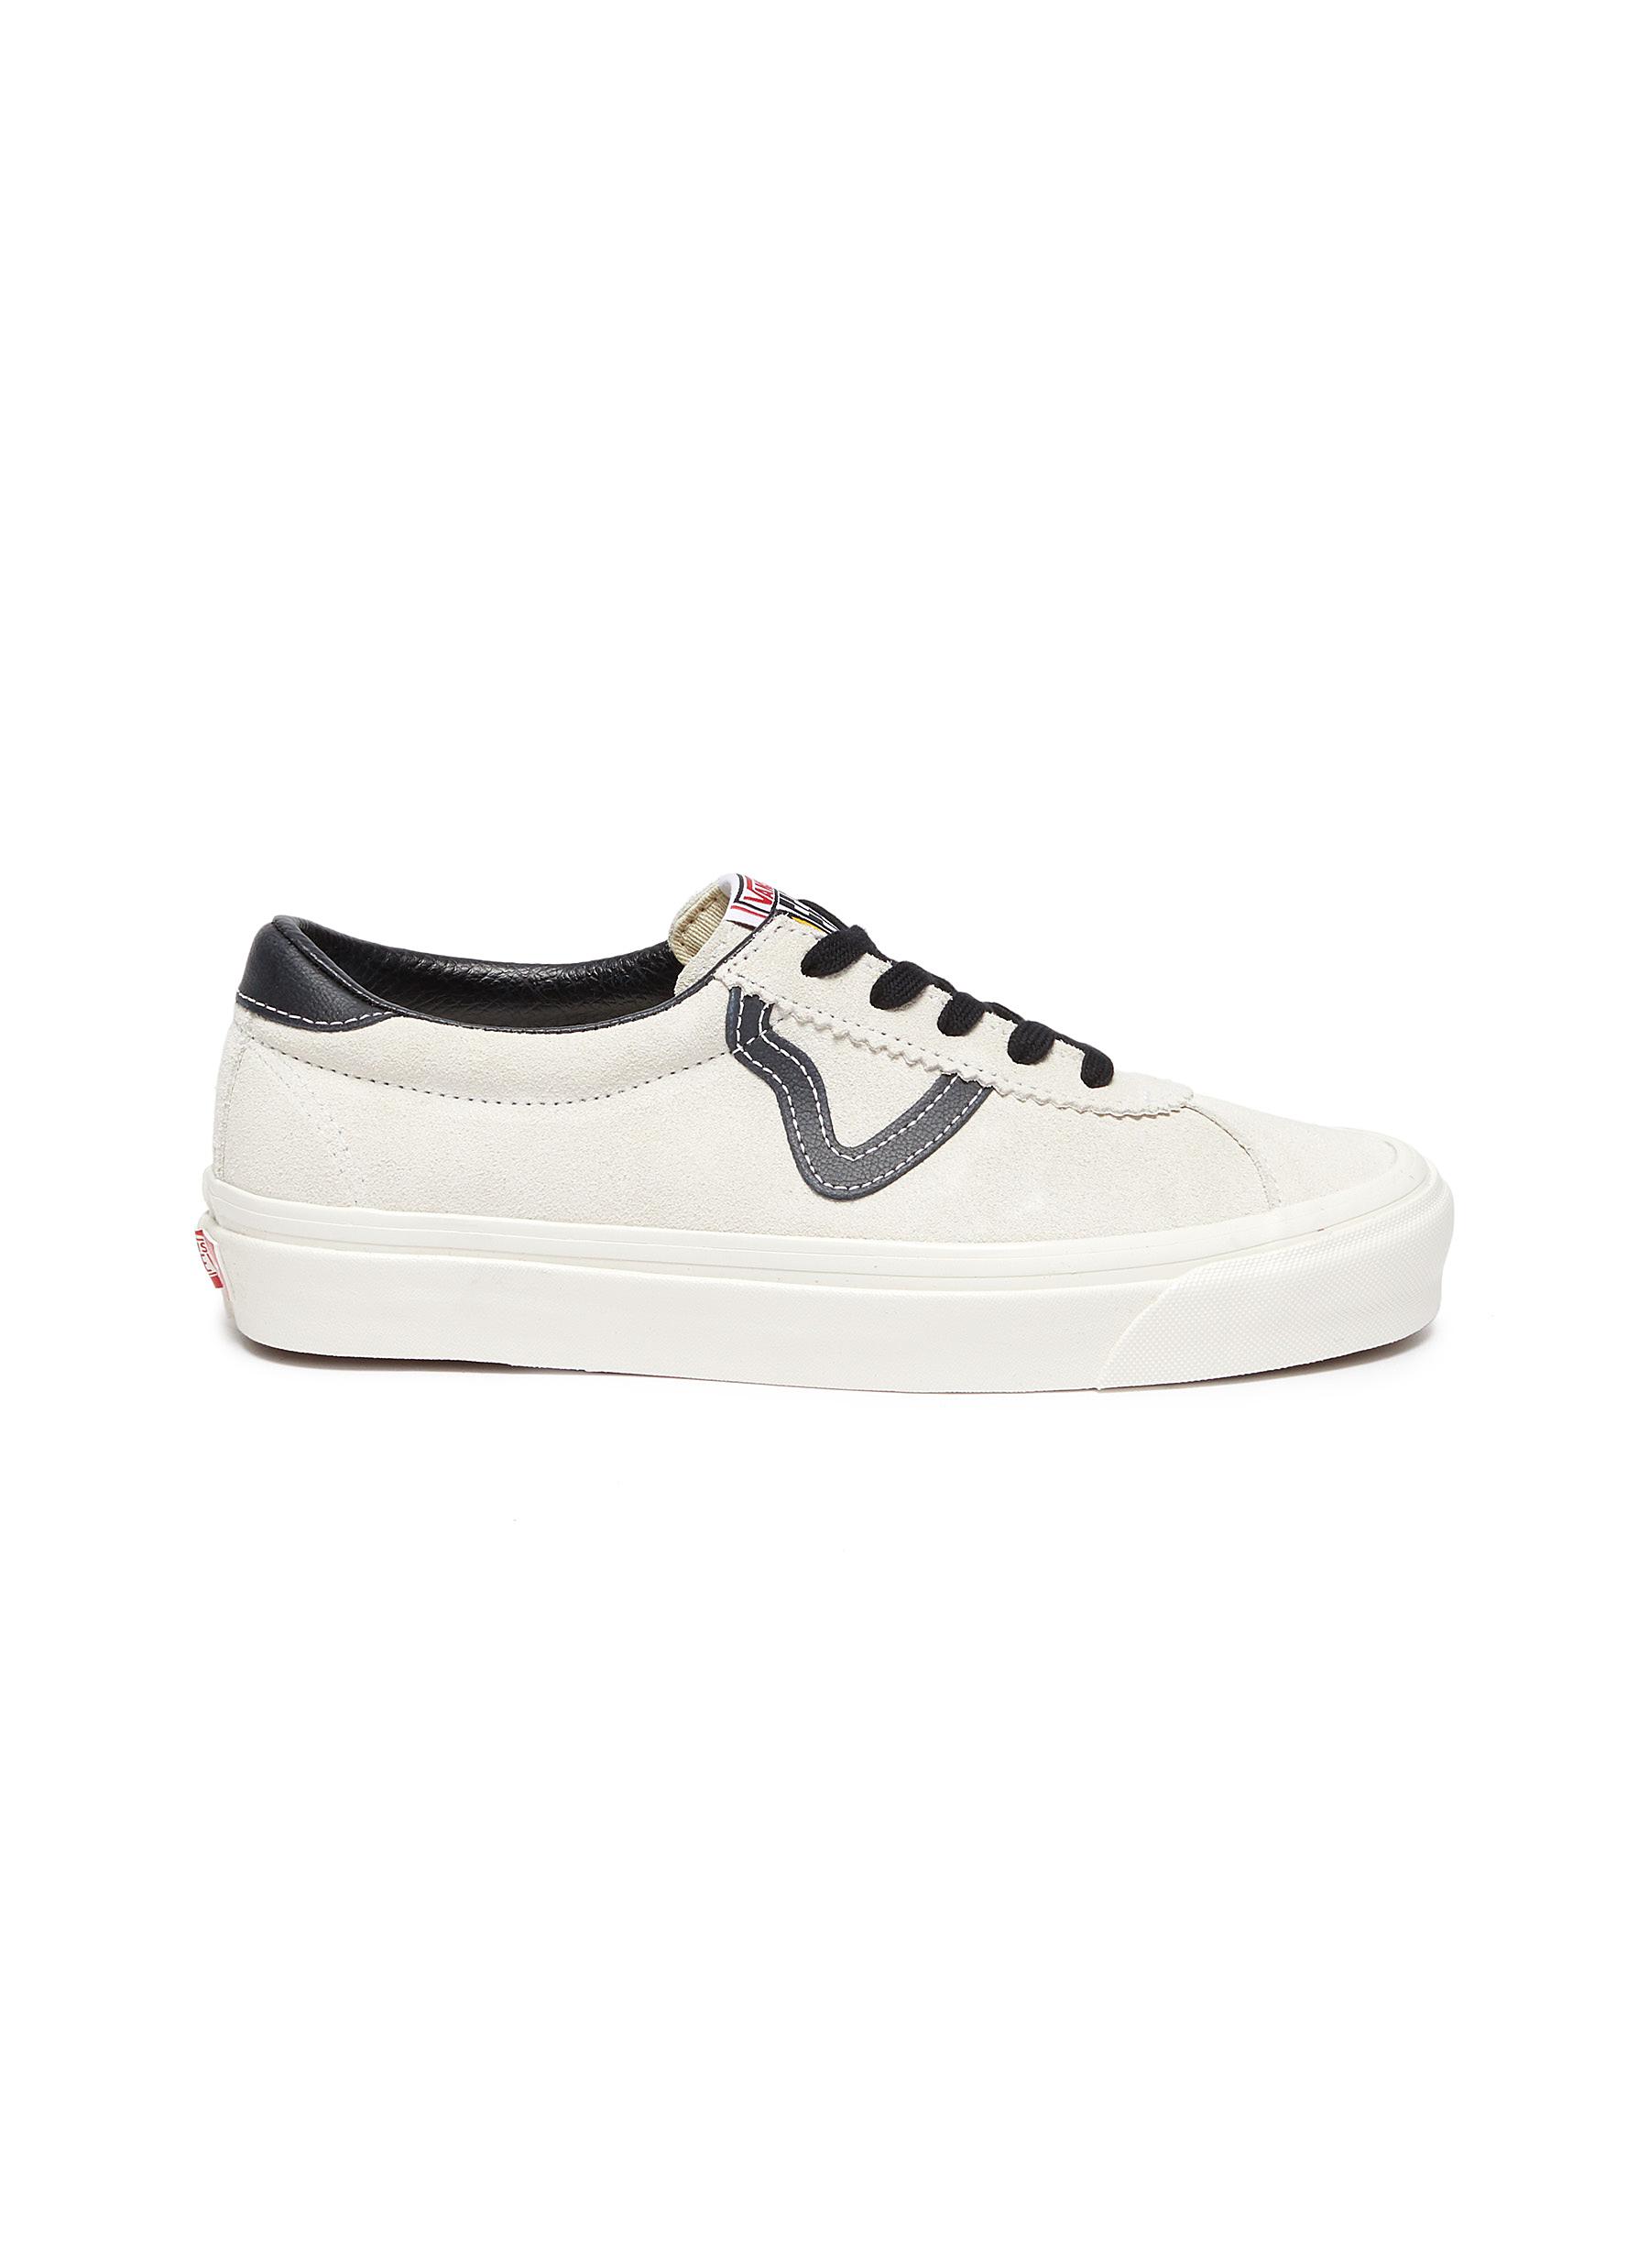 womens white lace up vans